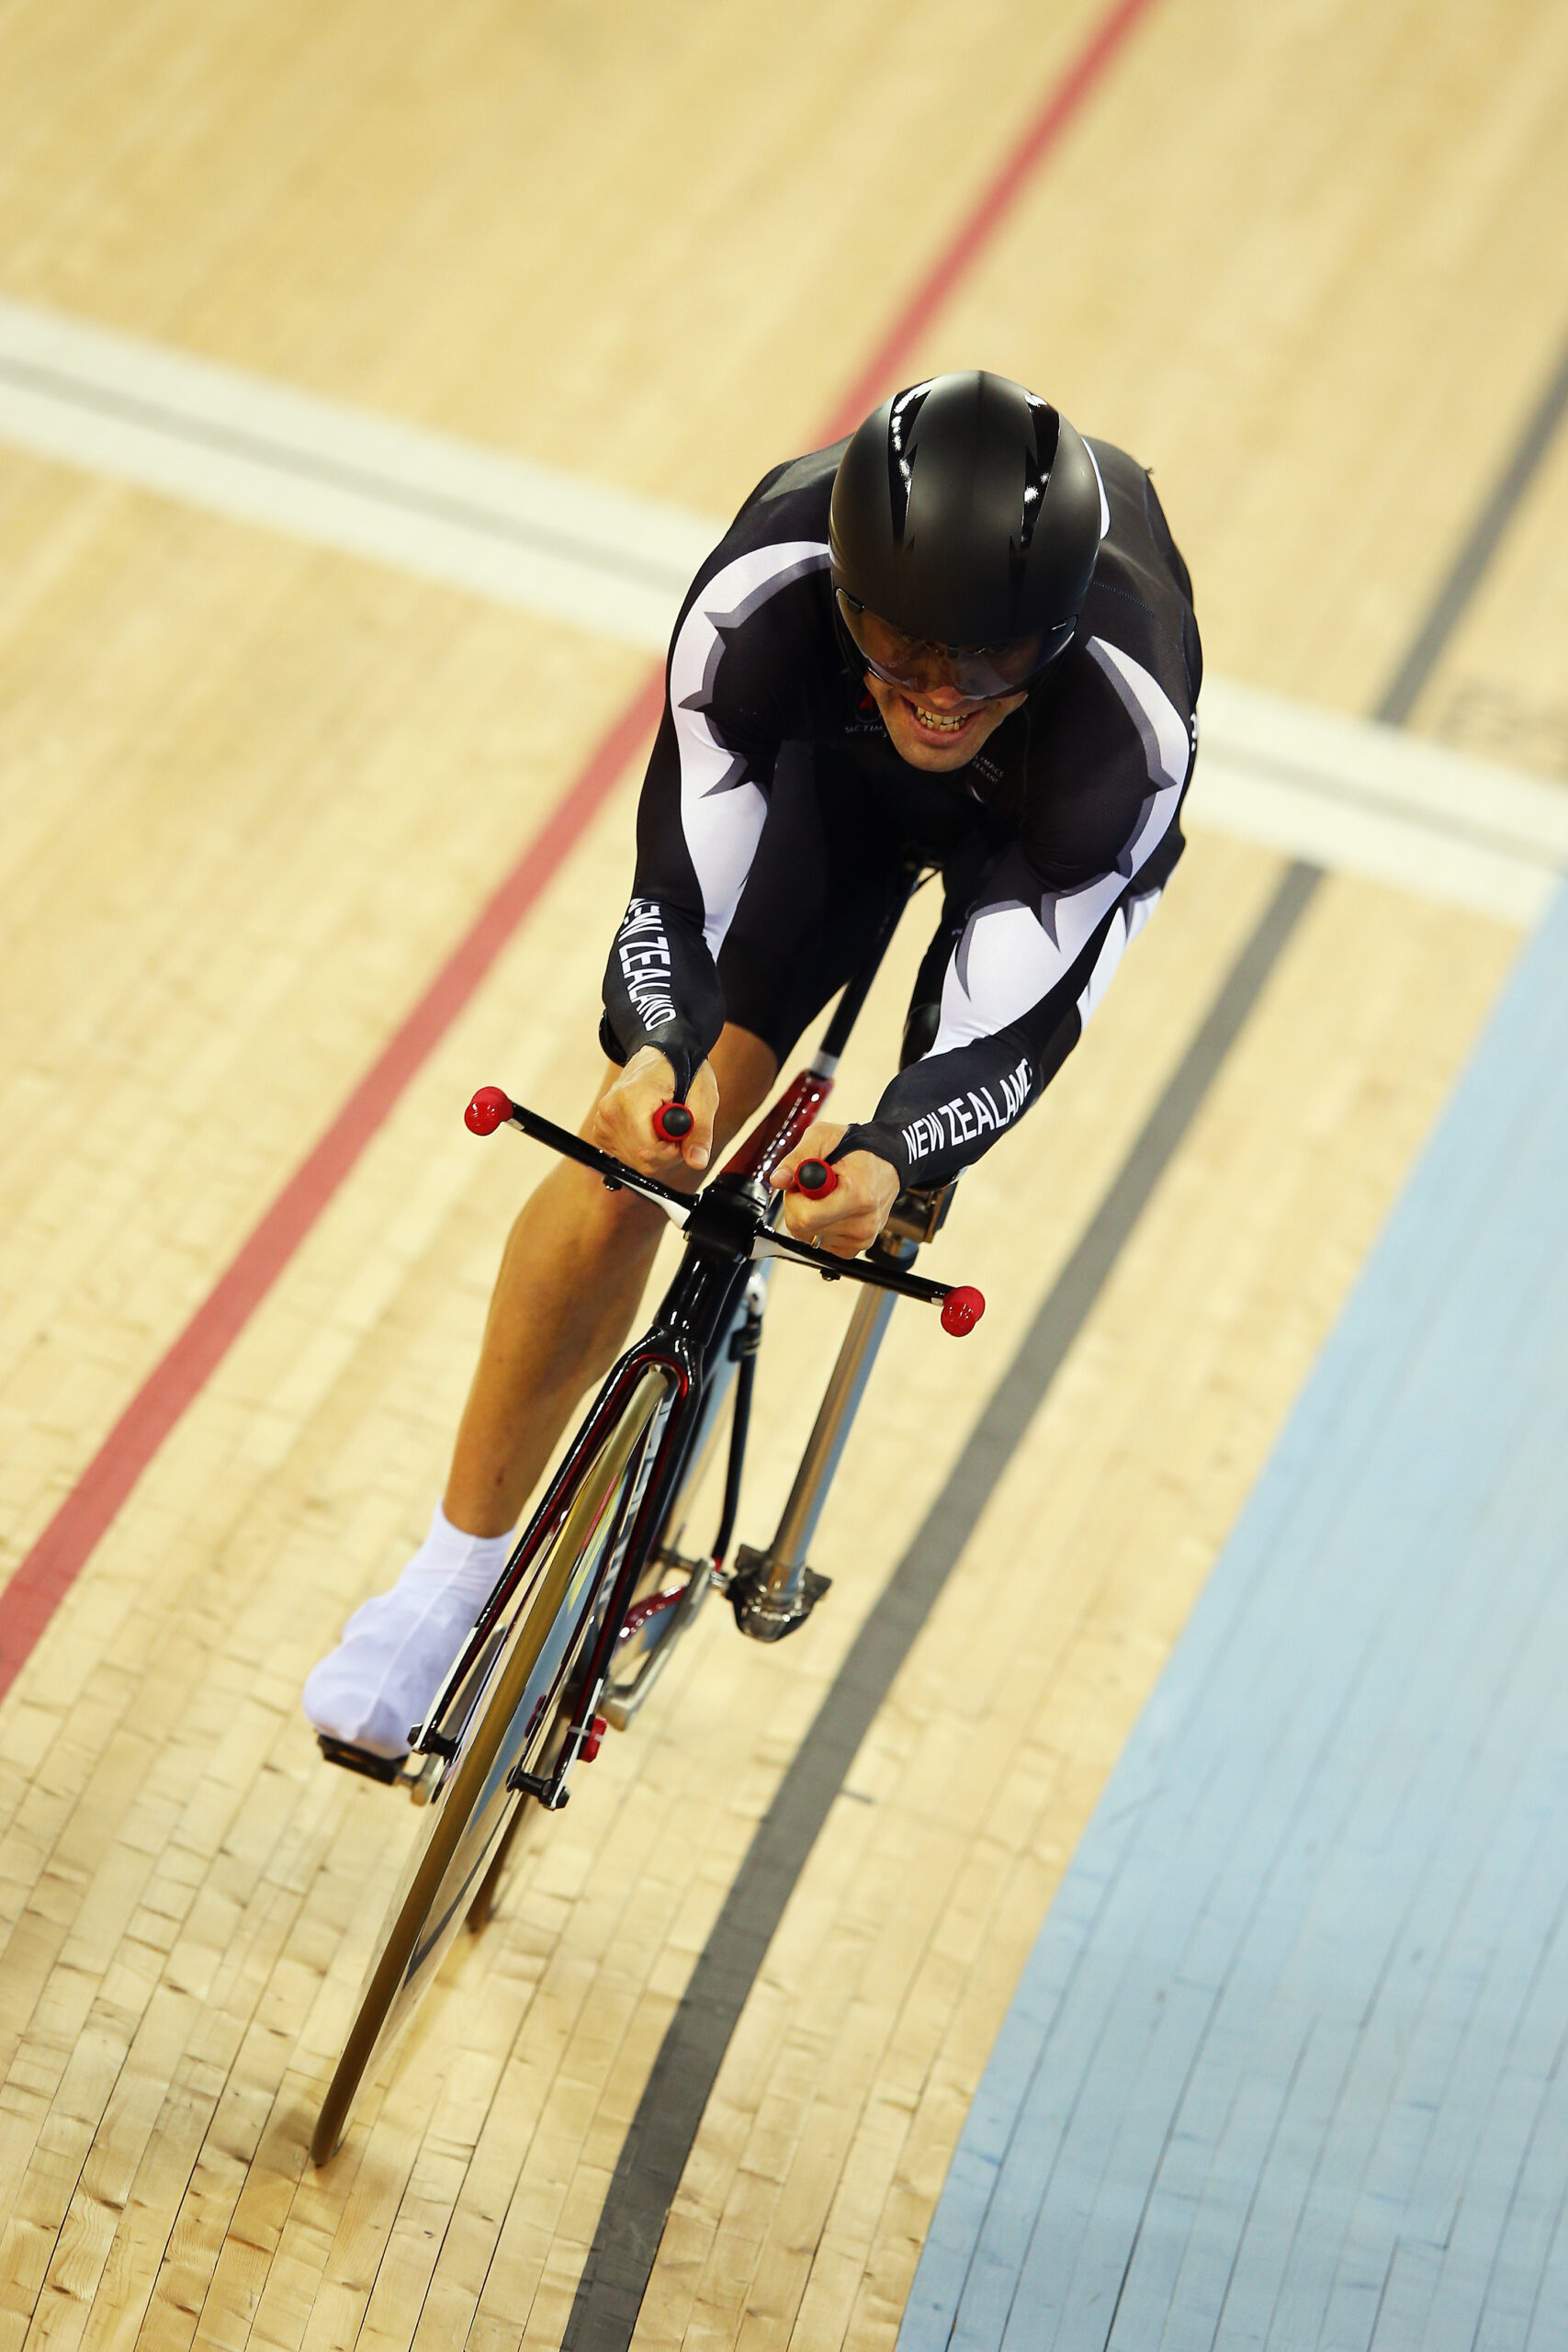 Nathan grits teeth as he cycles fast on velodrome track